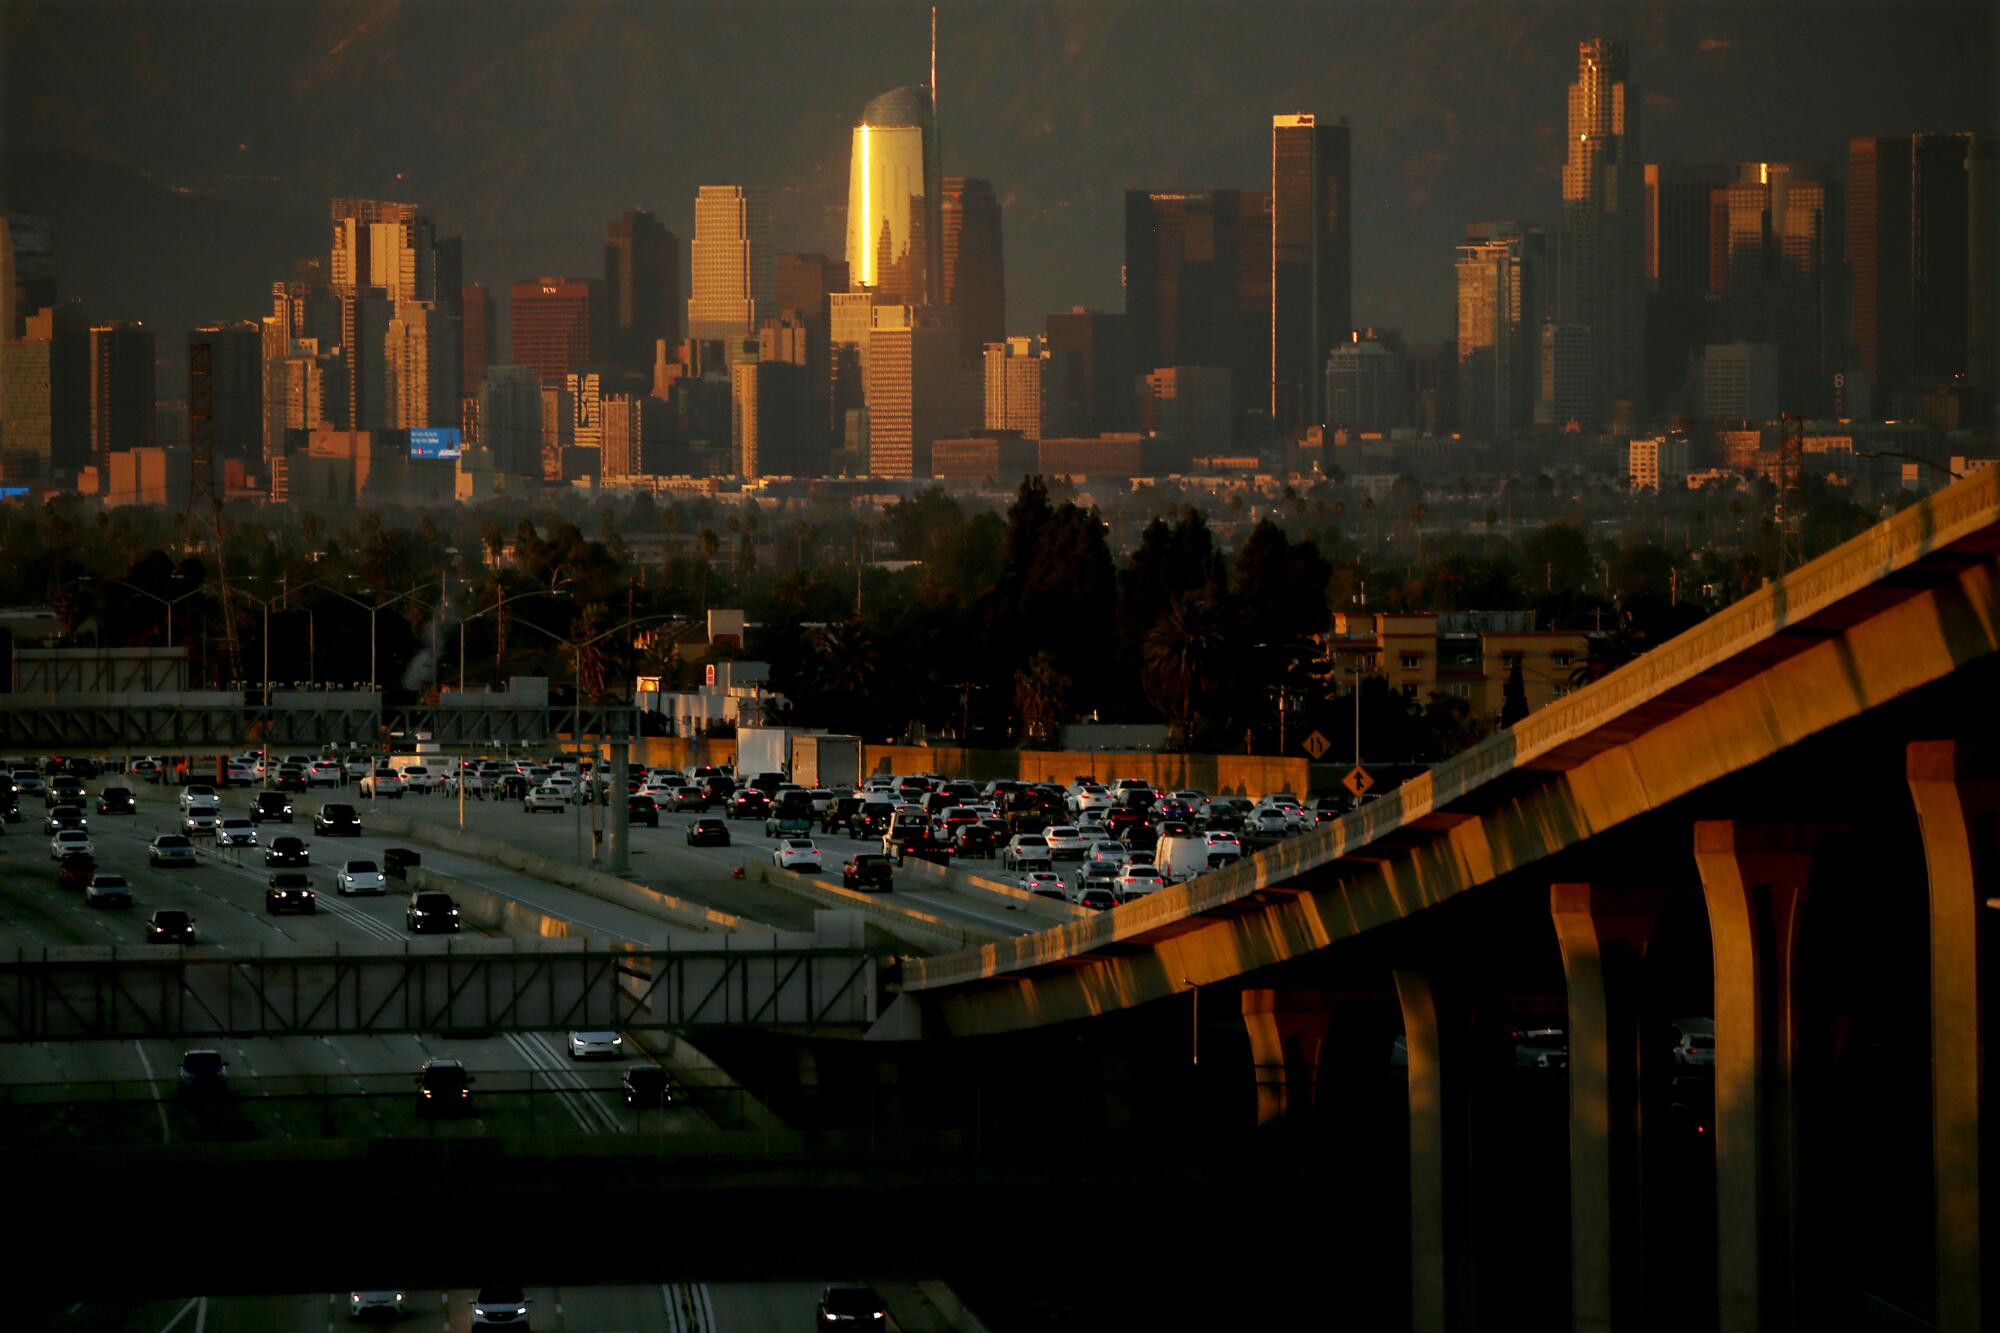 Los Angeles air the 'cleanest' it's been in a decade, but rising  temperatures could change that